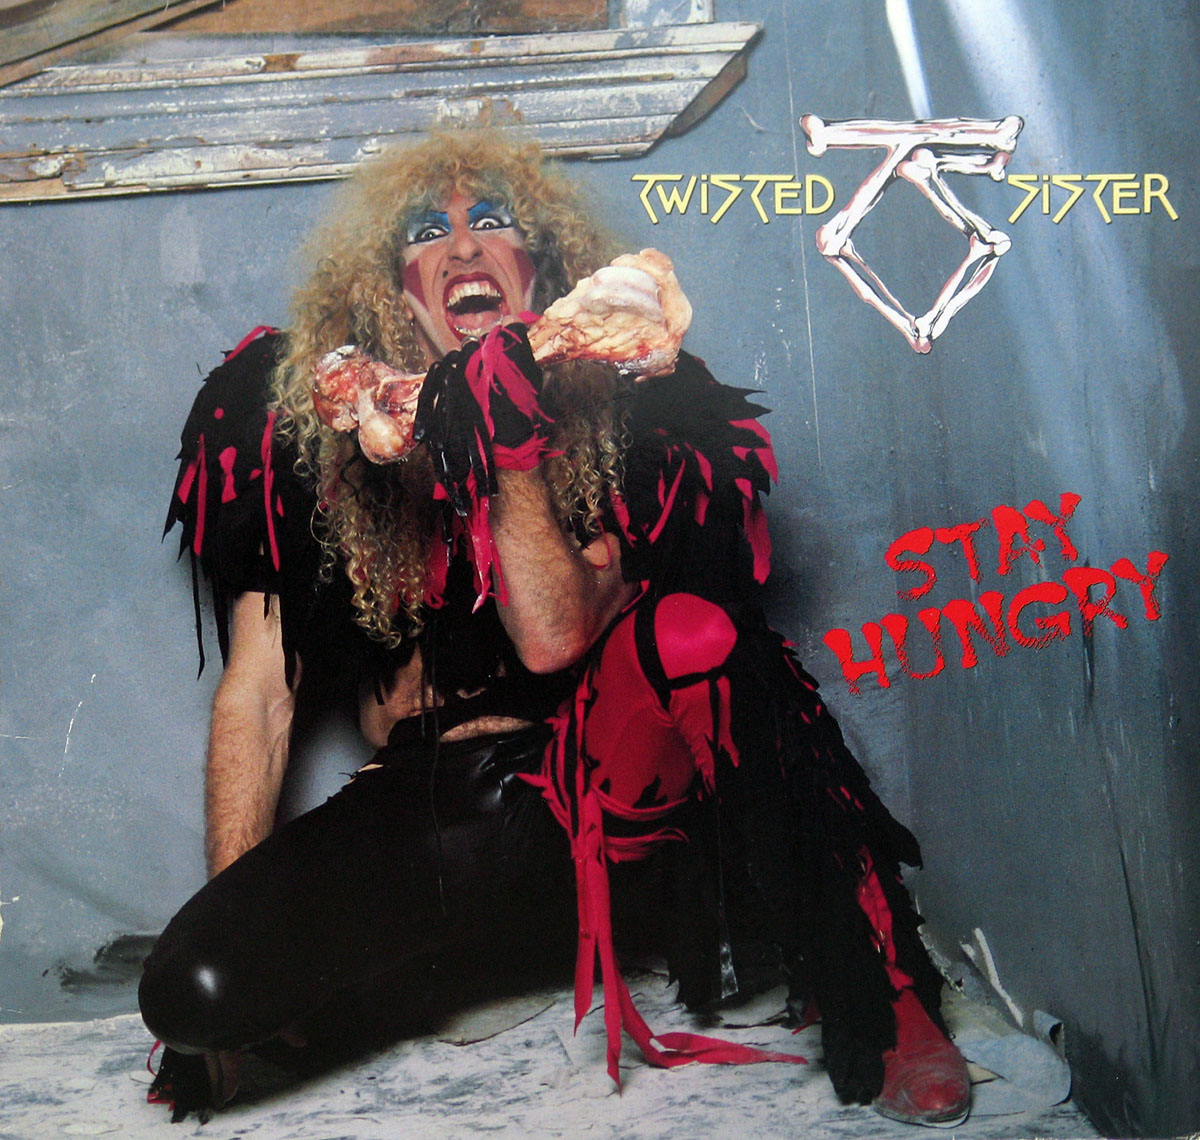 High Resolution Photos of twisted sister stay hungry germany 